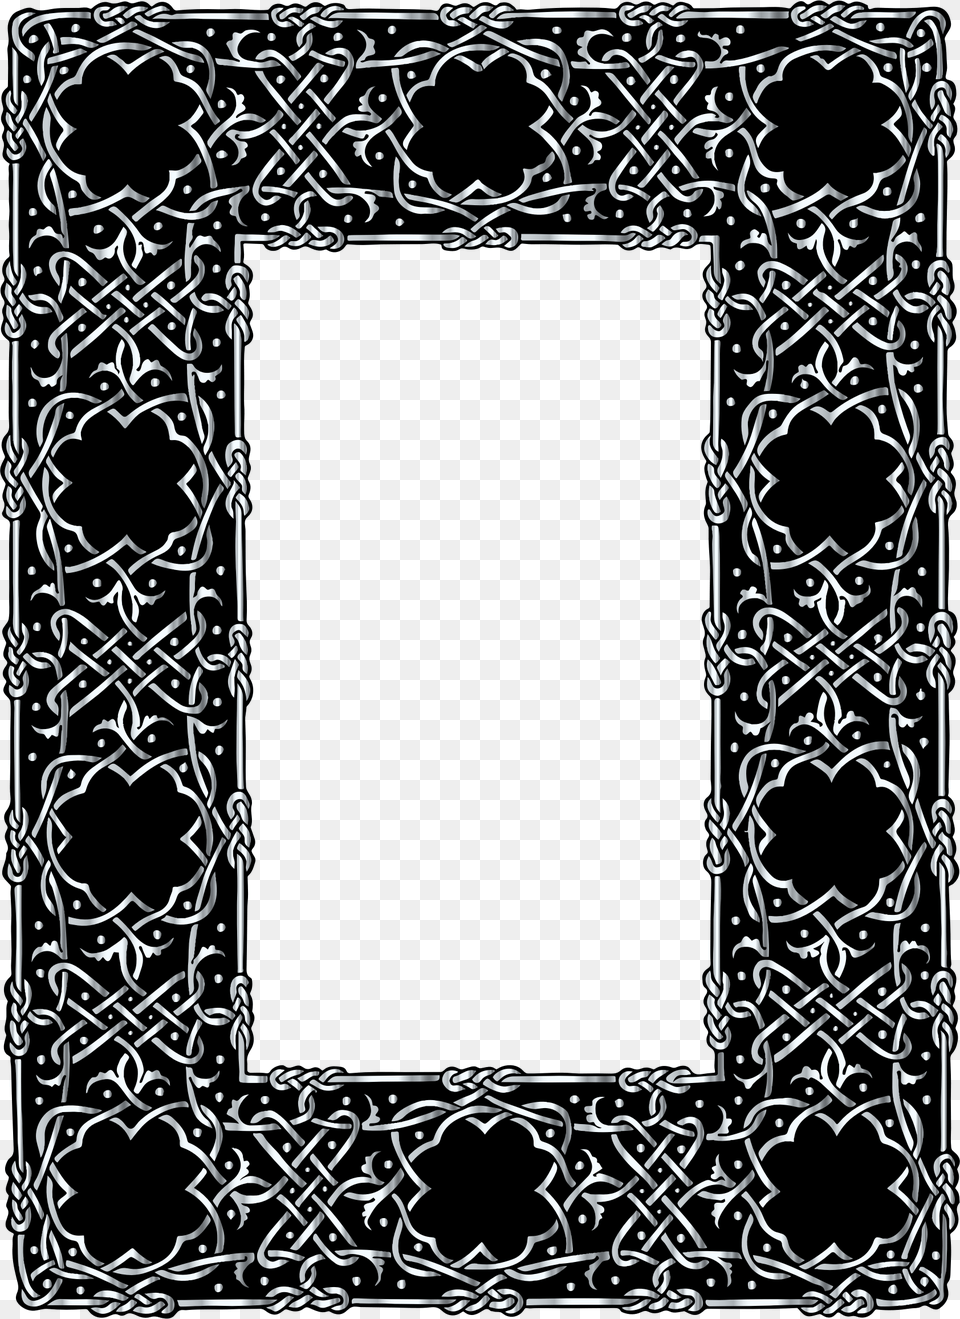 This Icons Design Of Silver Ornate Geometric, Home Decor, Rug, Accessories, Blackboard Free Transparent Png